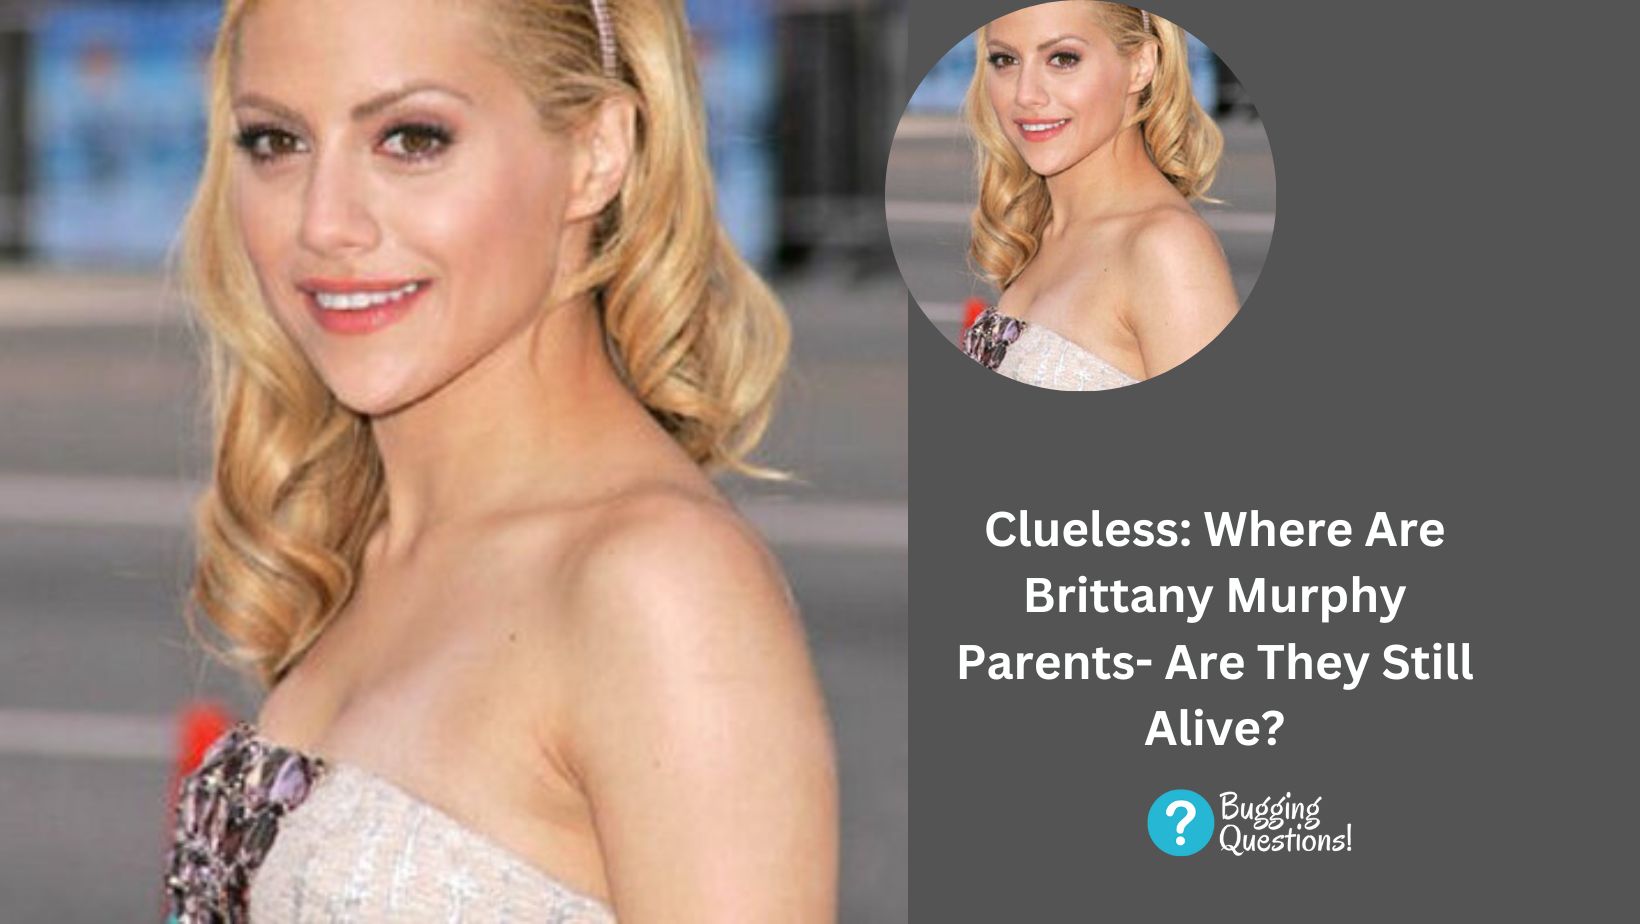 Clueless: Where Are Brittany Murphy Parents- Are They Still Alive?